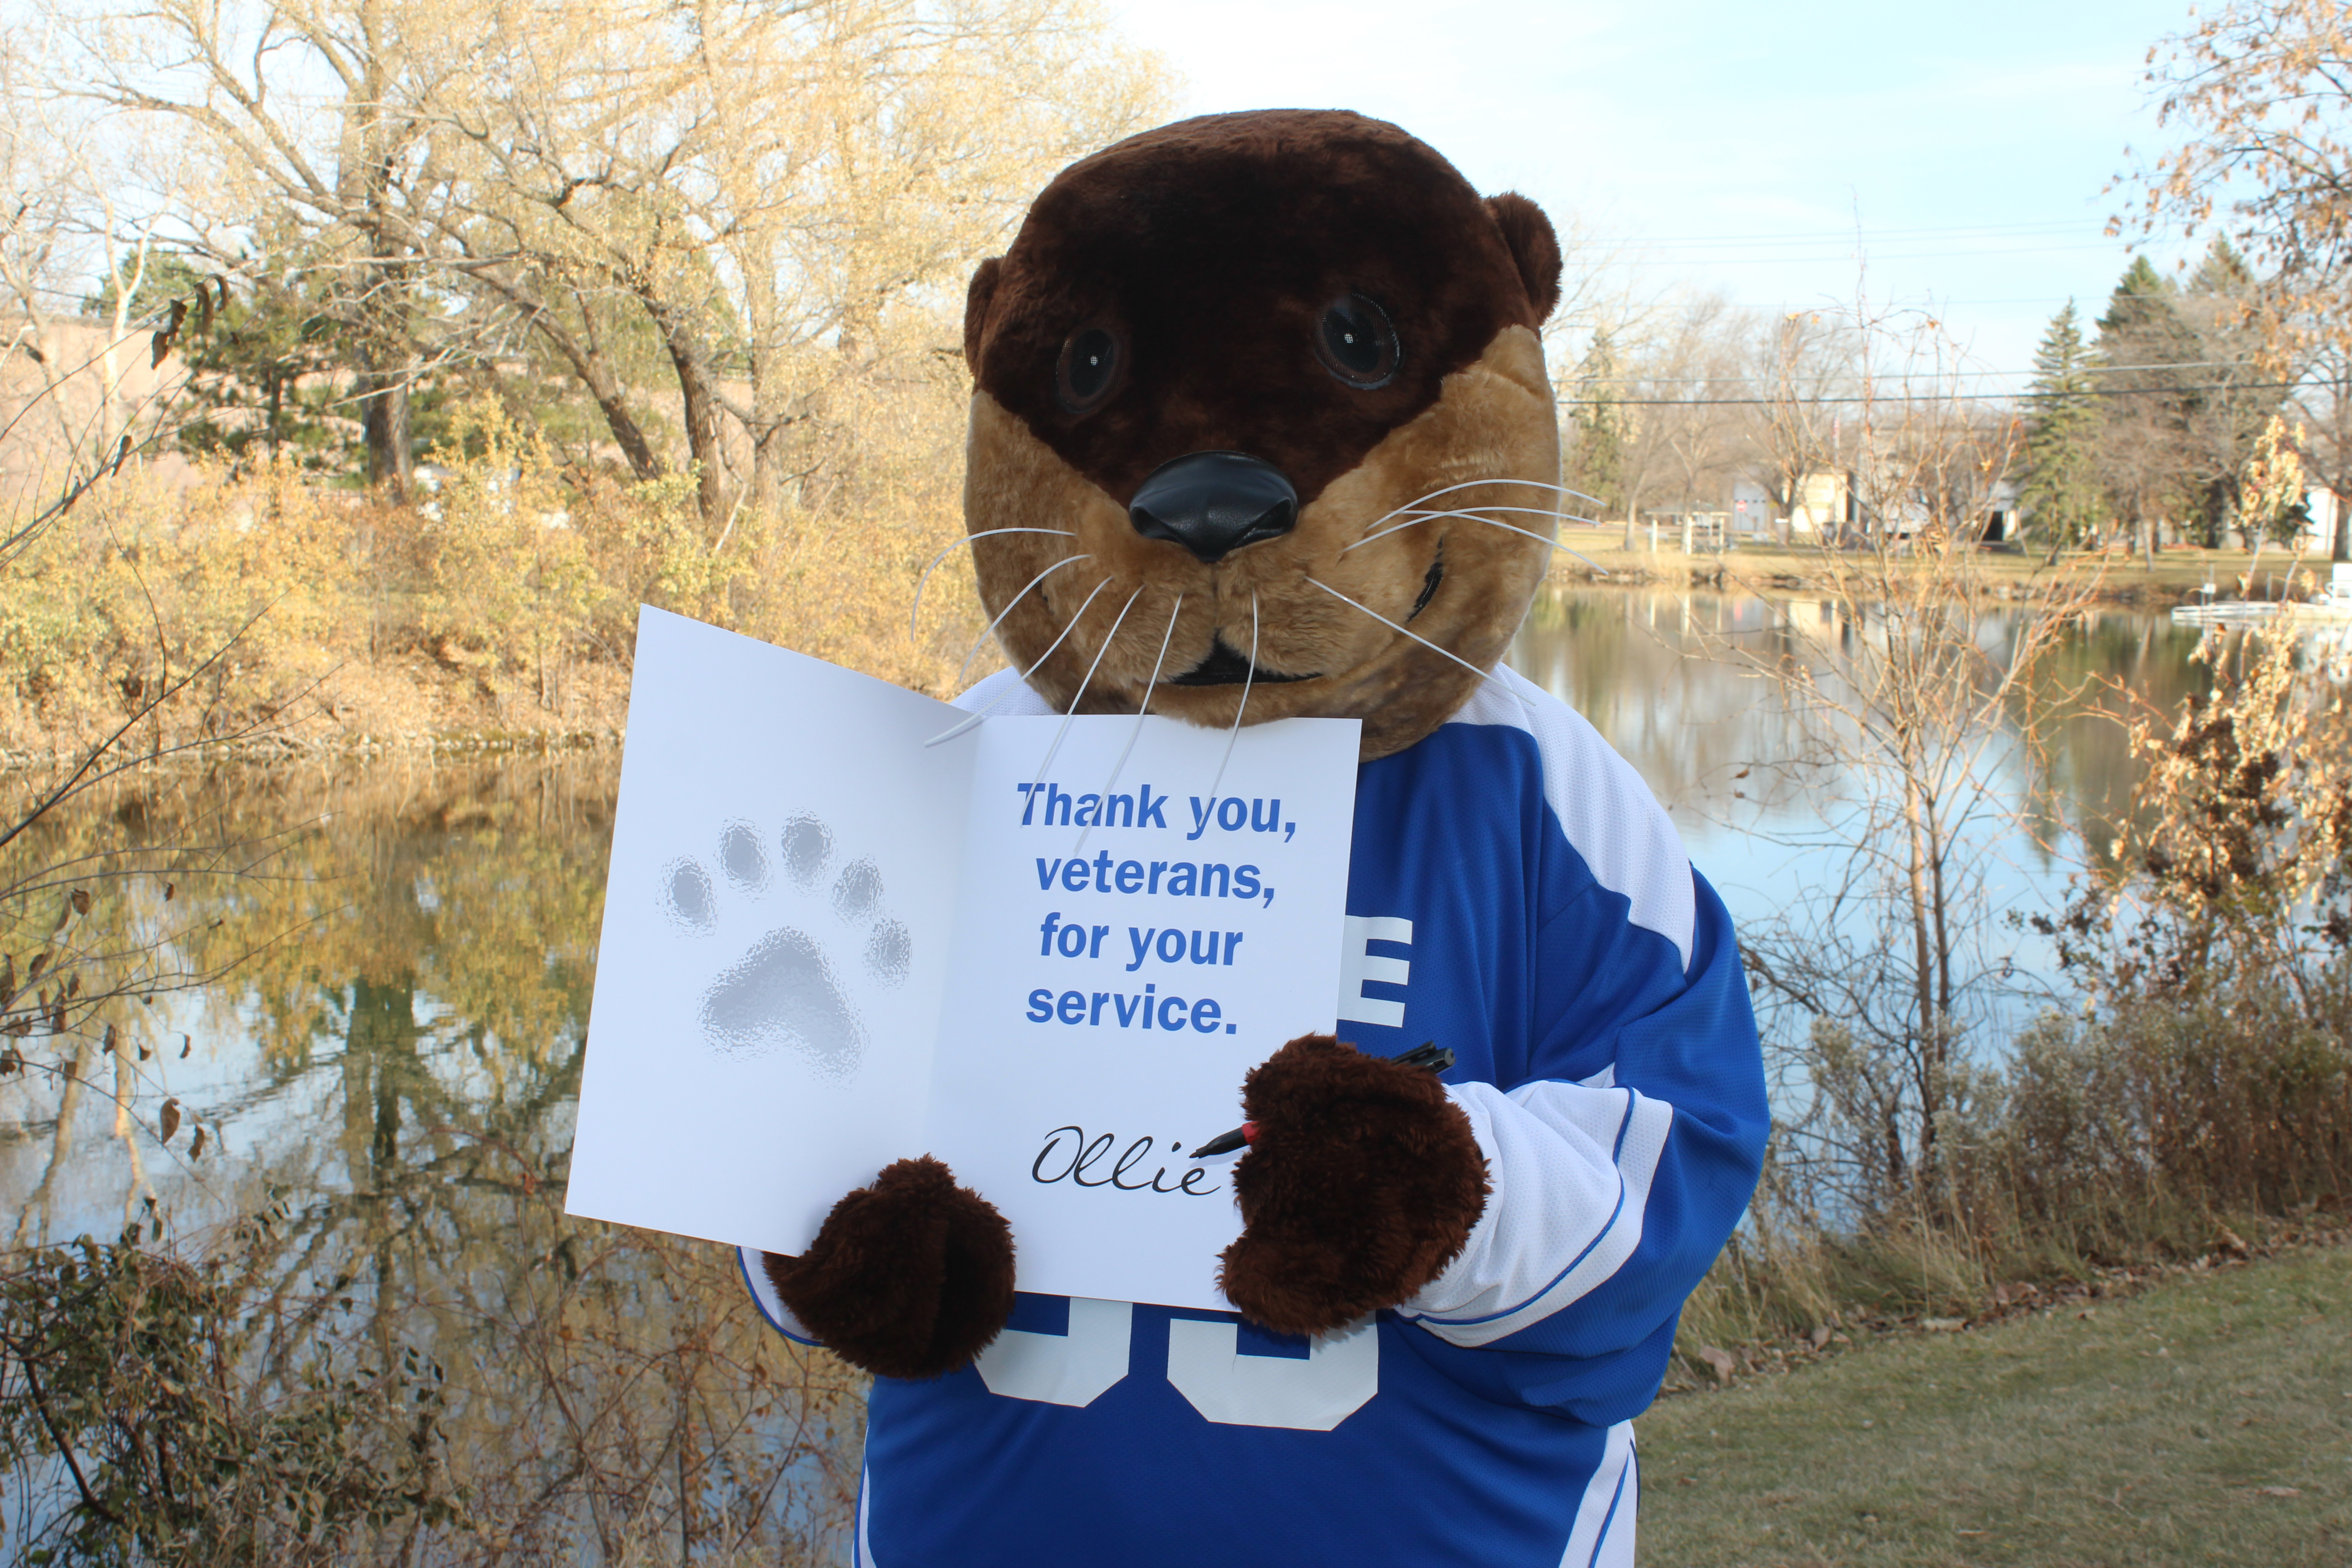 Ollie the Otter's note of thanks!